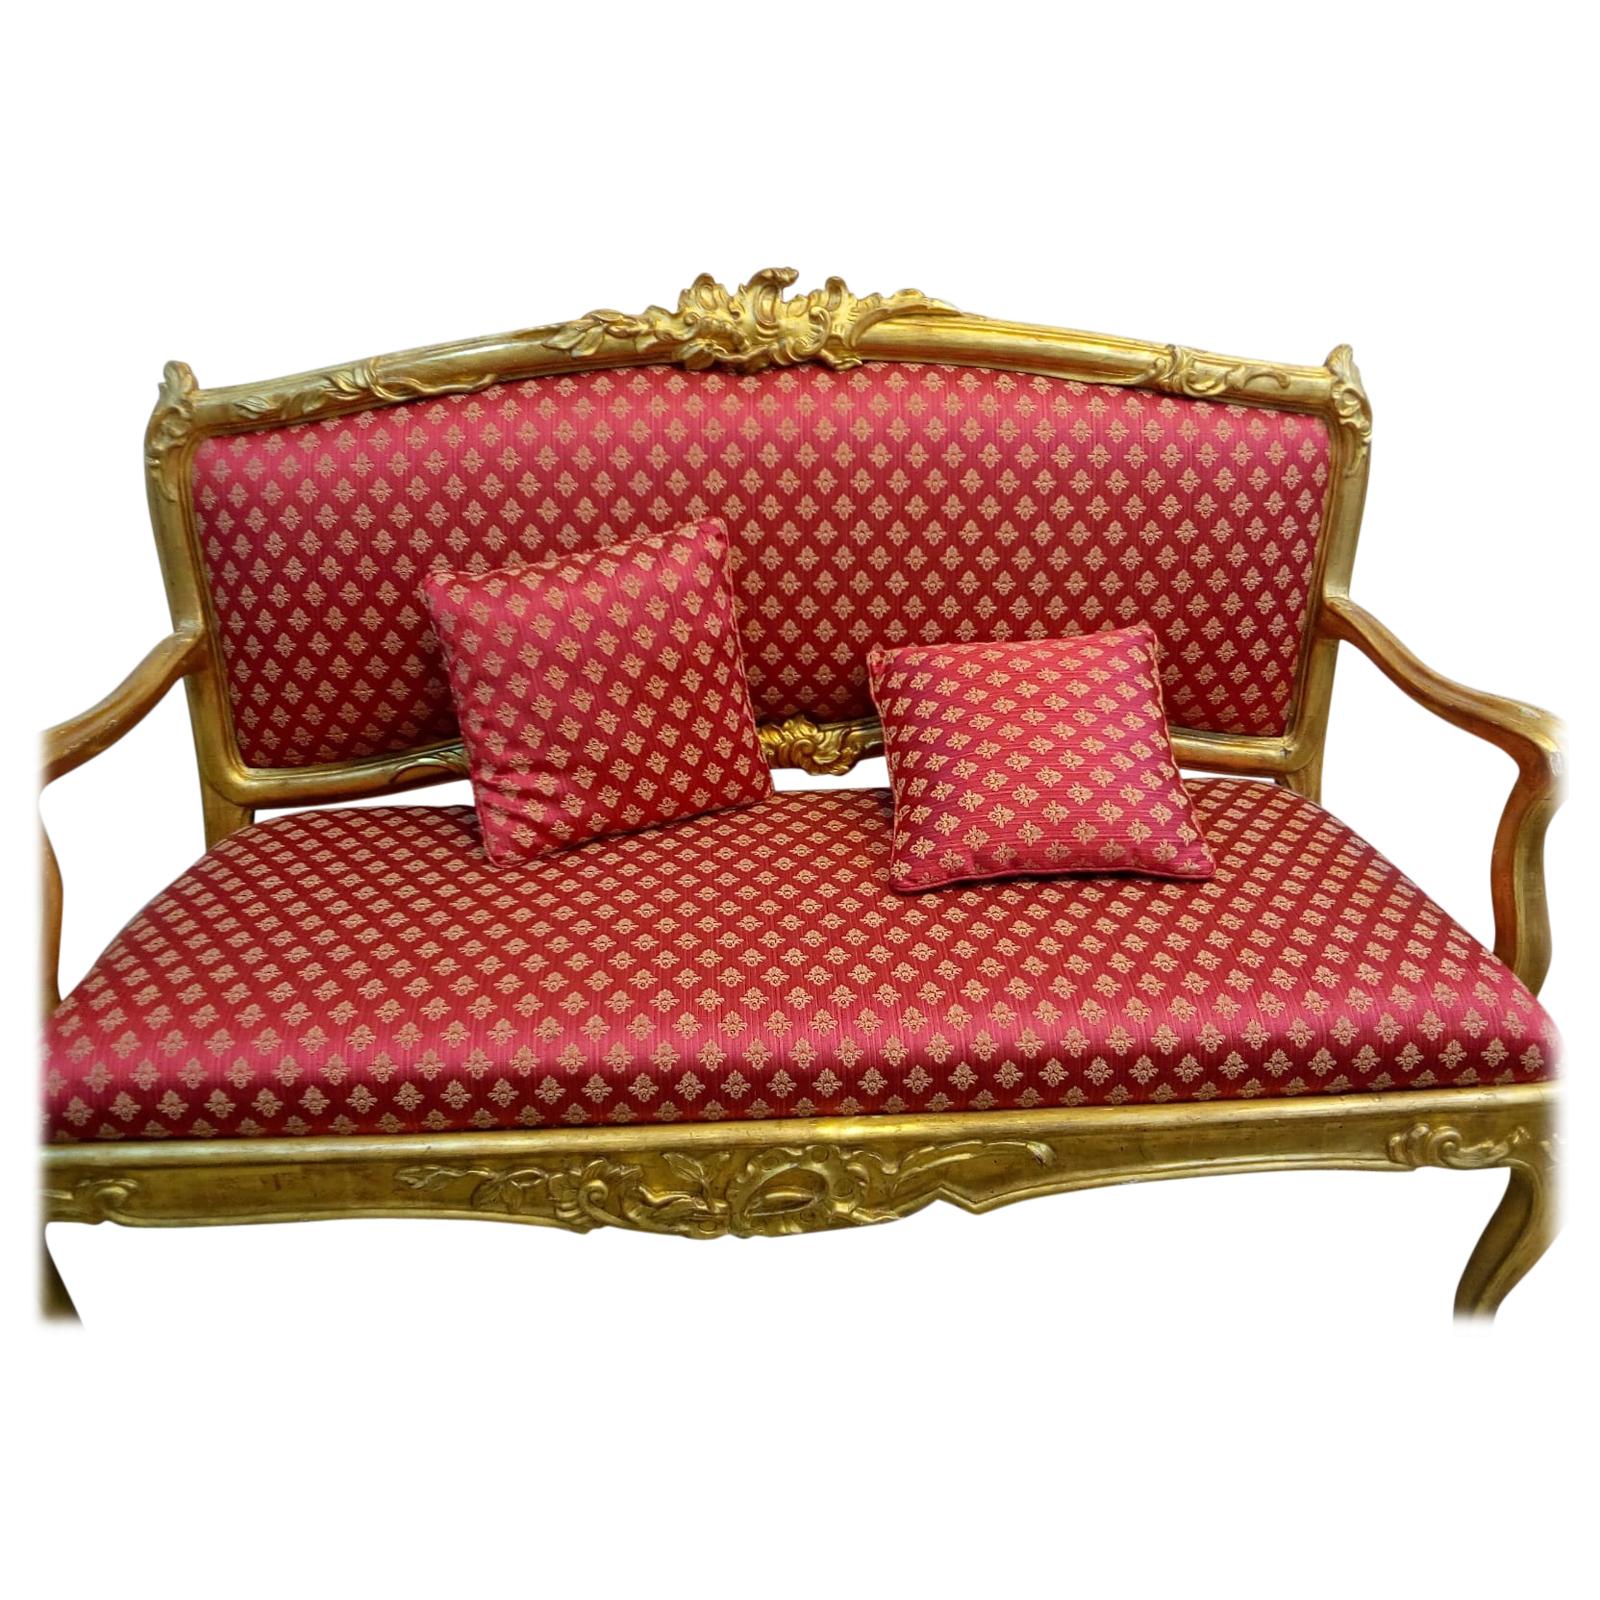 19th Century Golden Hand Carved Sofa from the Louis Phillipe Period '1830-1848' For Sale